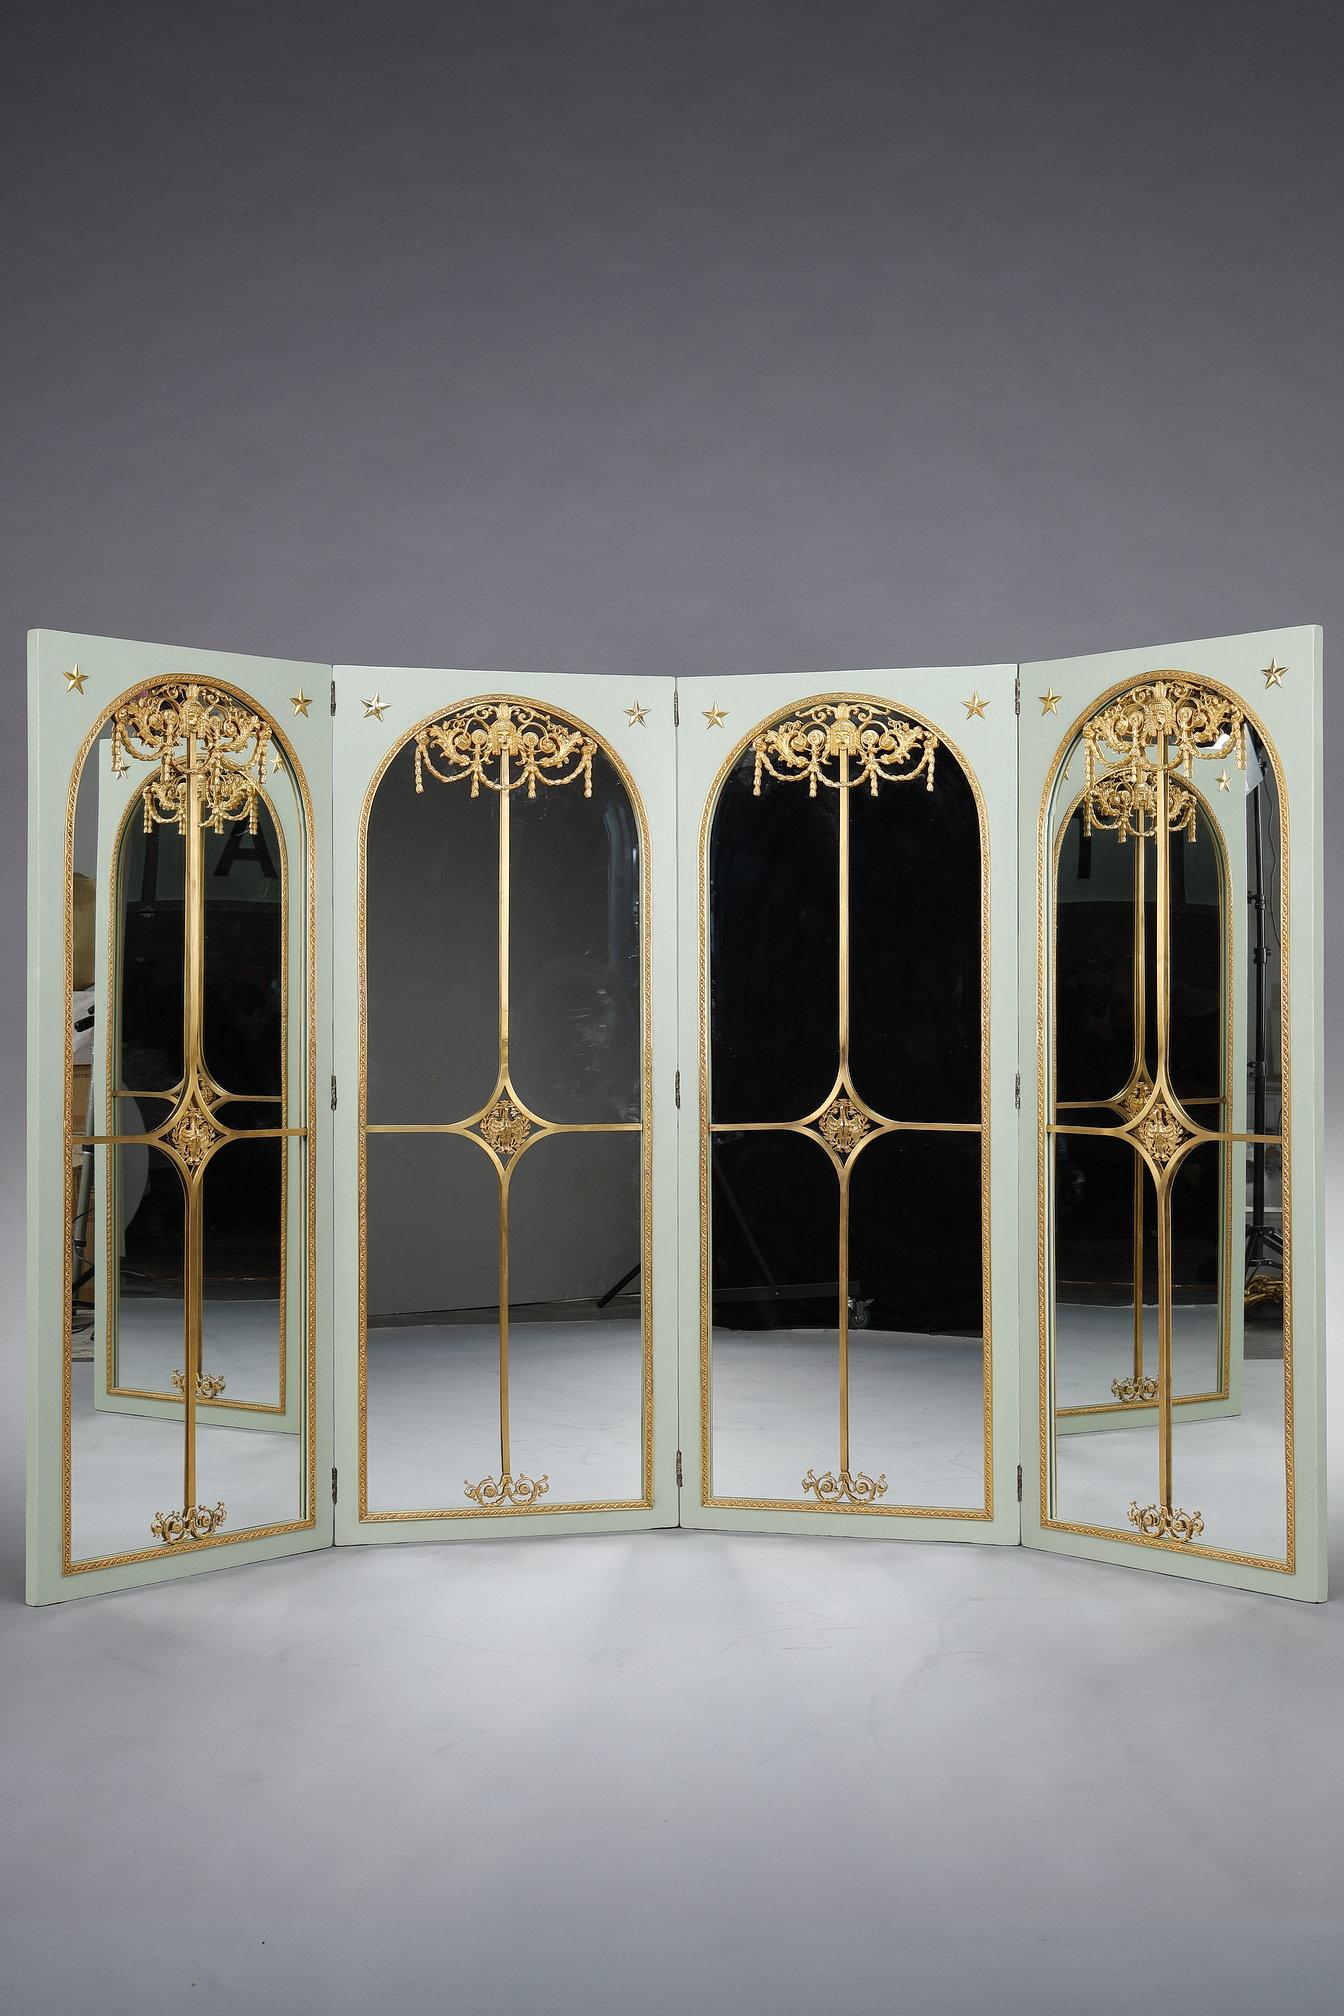 Four-leaf screen in an empire green lacquered wood frame. The main face is richly decorated in gilded bronze with Commedia dell'Arte masks, foliage, garlands, stars, a cross and a swan in the center. This decoration is superimposed on mirrors, the